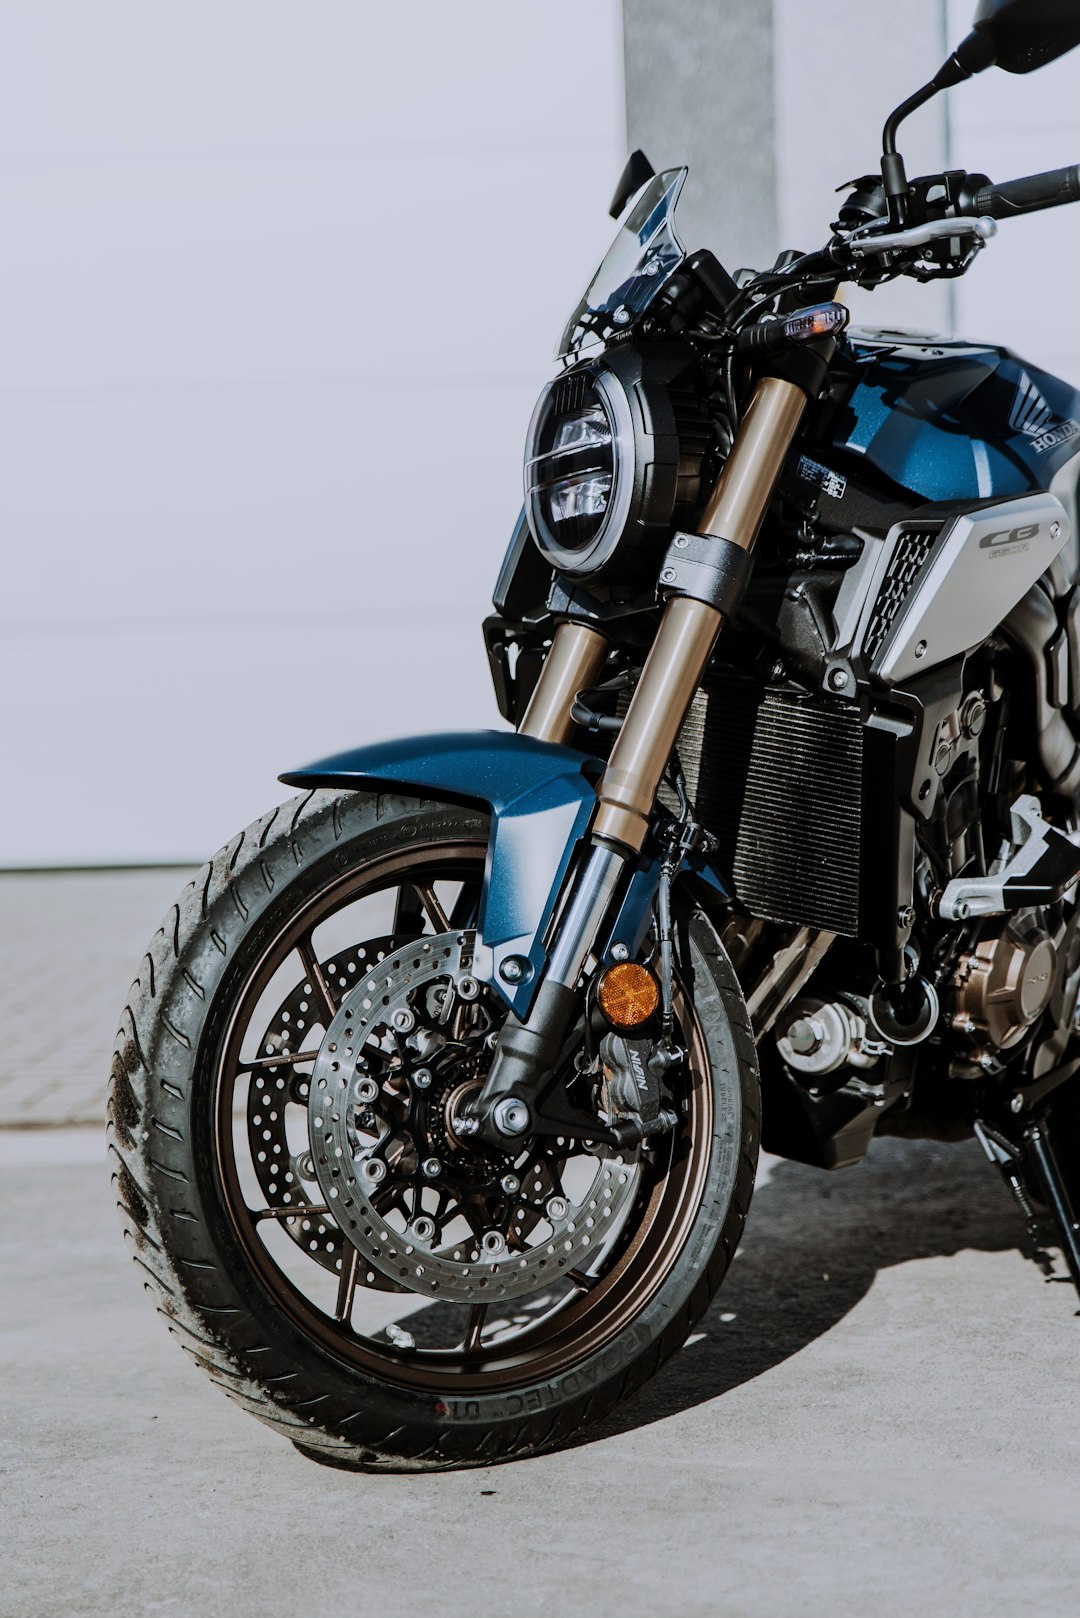 blue and black motorcycle on gray concrete floor